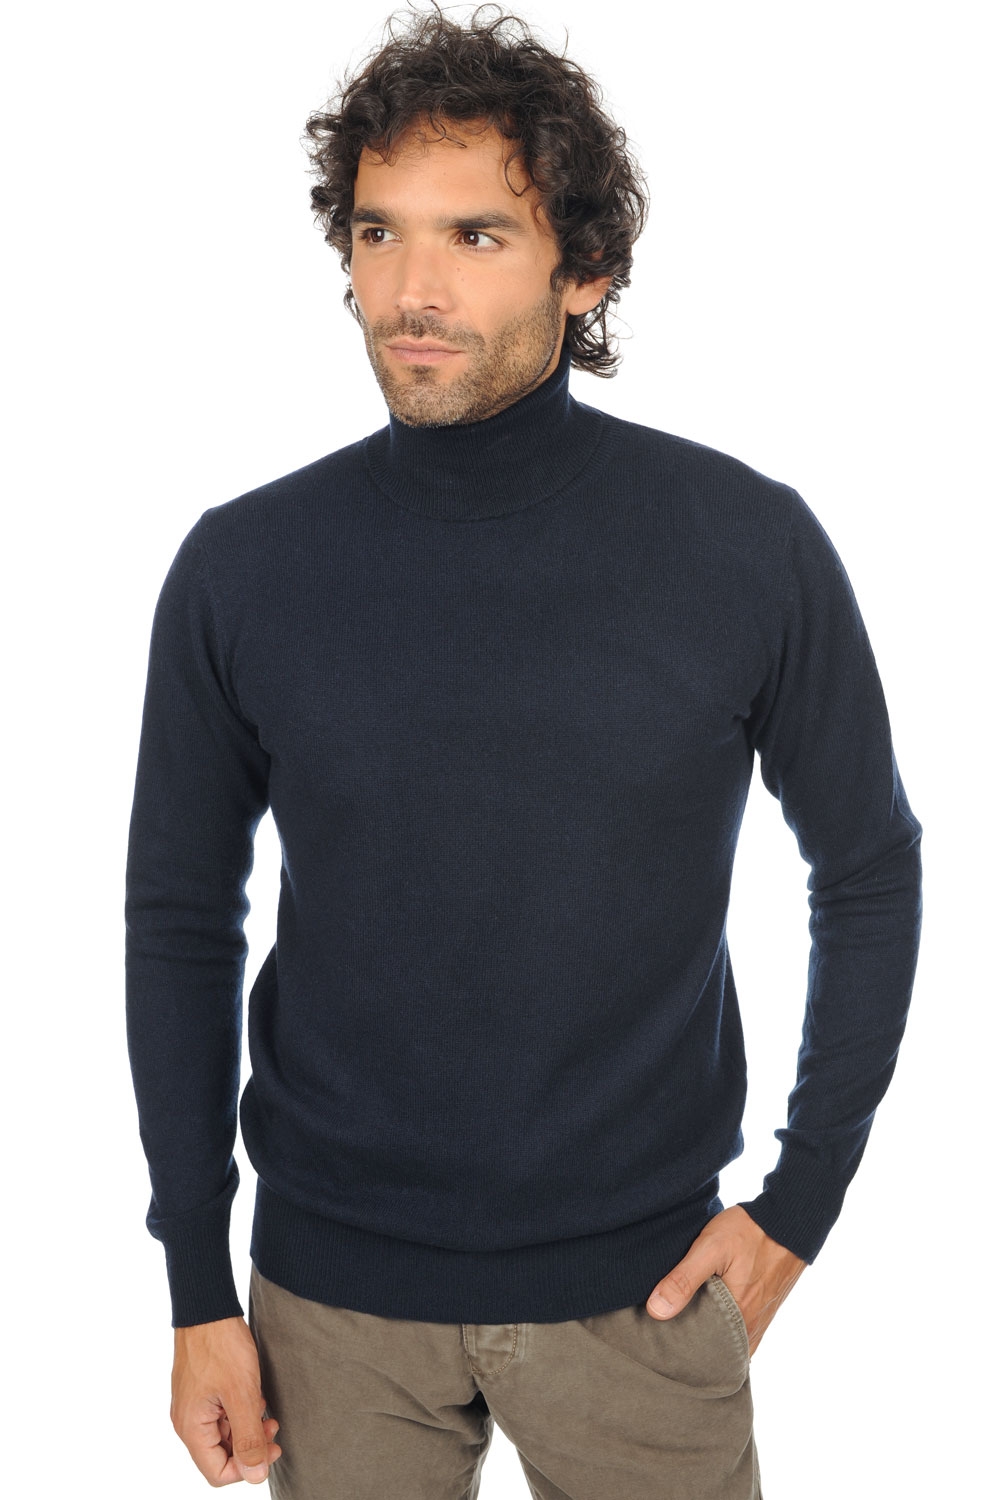 Cachemire pull homme tarry first marine fonce xl